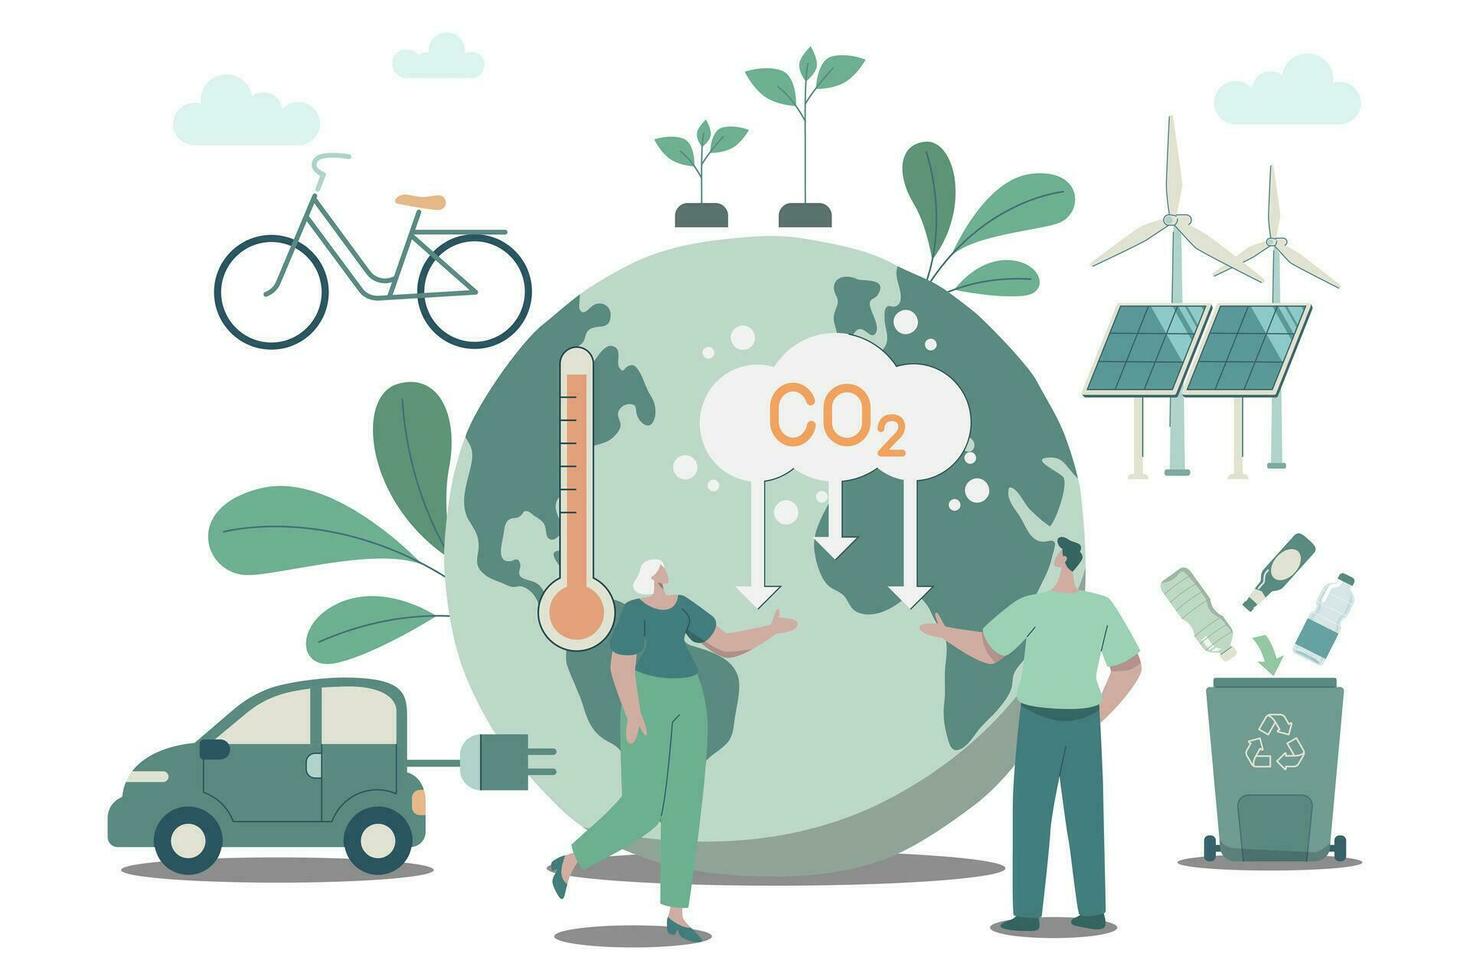 Developing sustainable CO2 concepts, using clean energy, sustainable environmental management. Climate change problem concept. Vector design illustration.